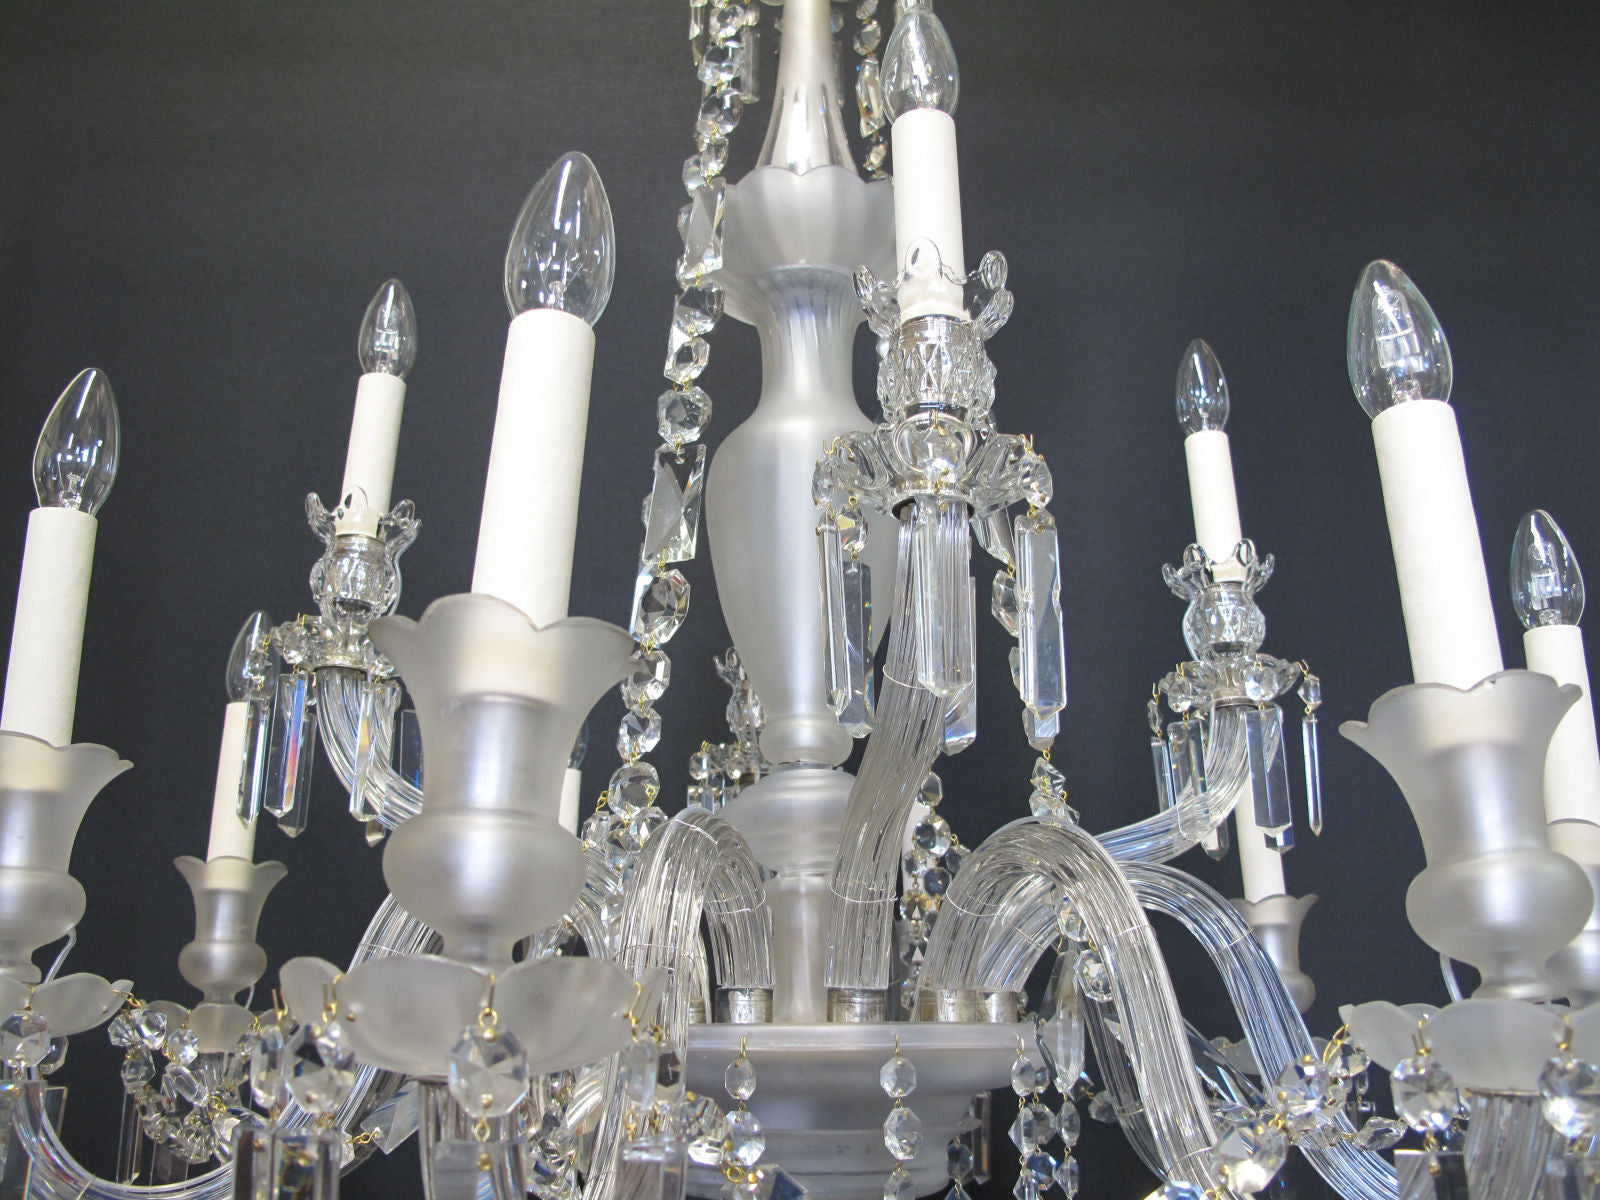 12 arm victorian chandelier, amongst the arms